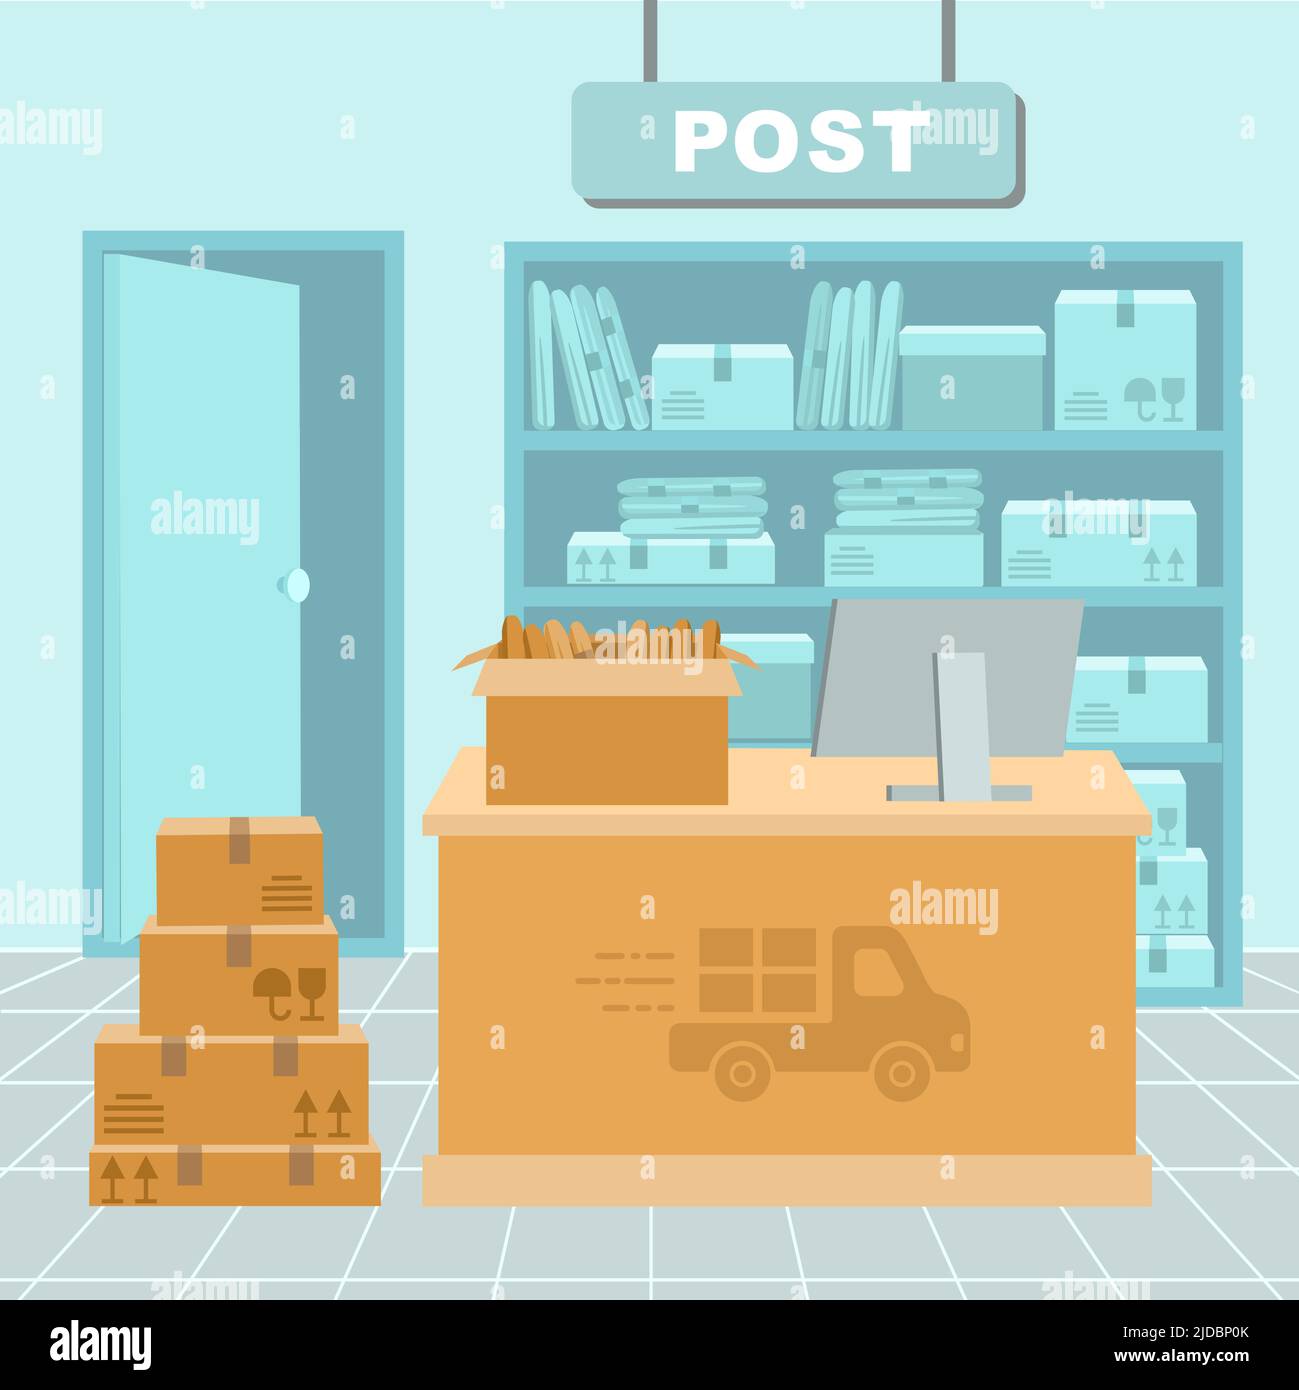 Vector illustration of the interior of the post office or delivery service. ile of stacked cardboard boxe before the reception or delivery desk Stock Vector